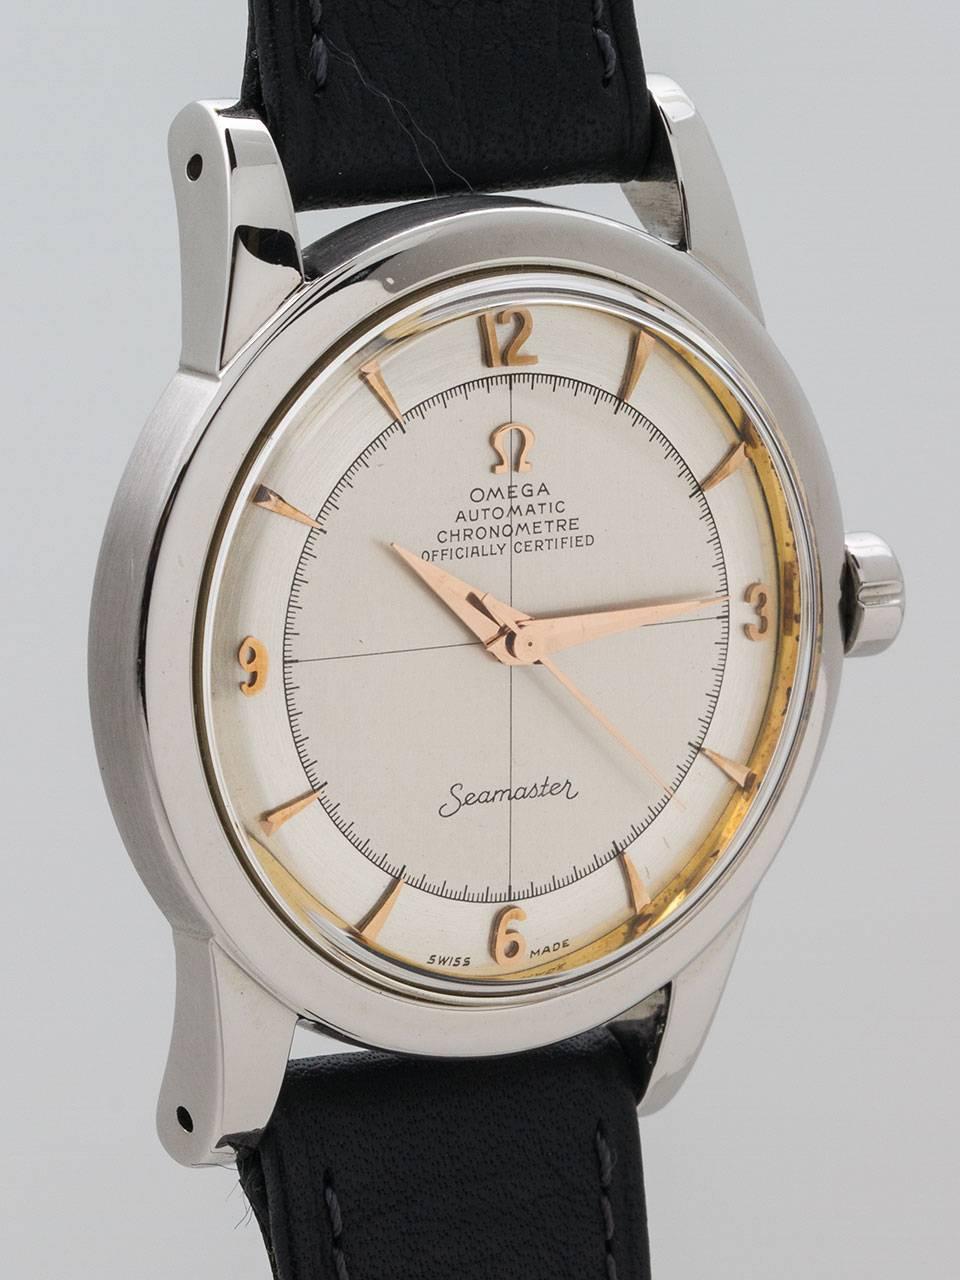 Omega Stainless Steel Seamaster Chronometer ref 2577-9 circa 1950s. Case measuring 35 x 43mm with smooth bezel and screw down case back. Lovely silver satin dial with applied gold pointed indexes, Arabic numerals and hands. Powered by self winding